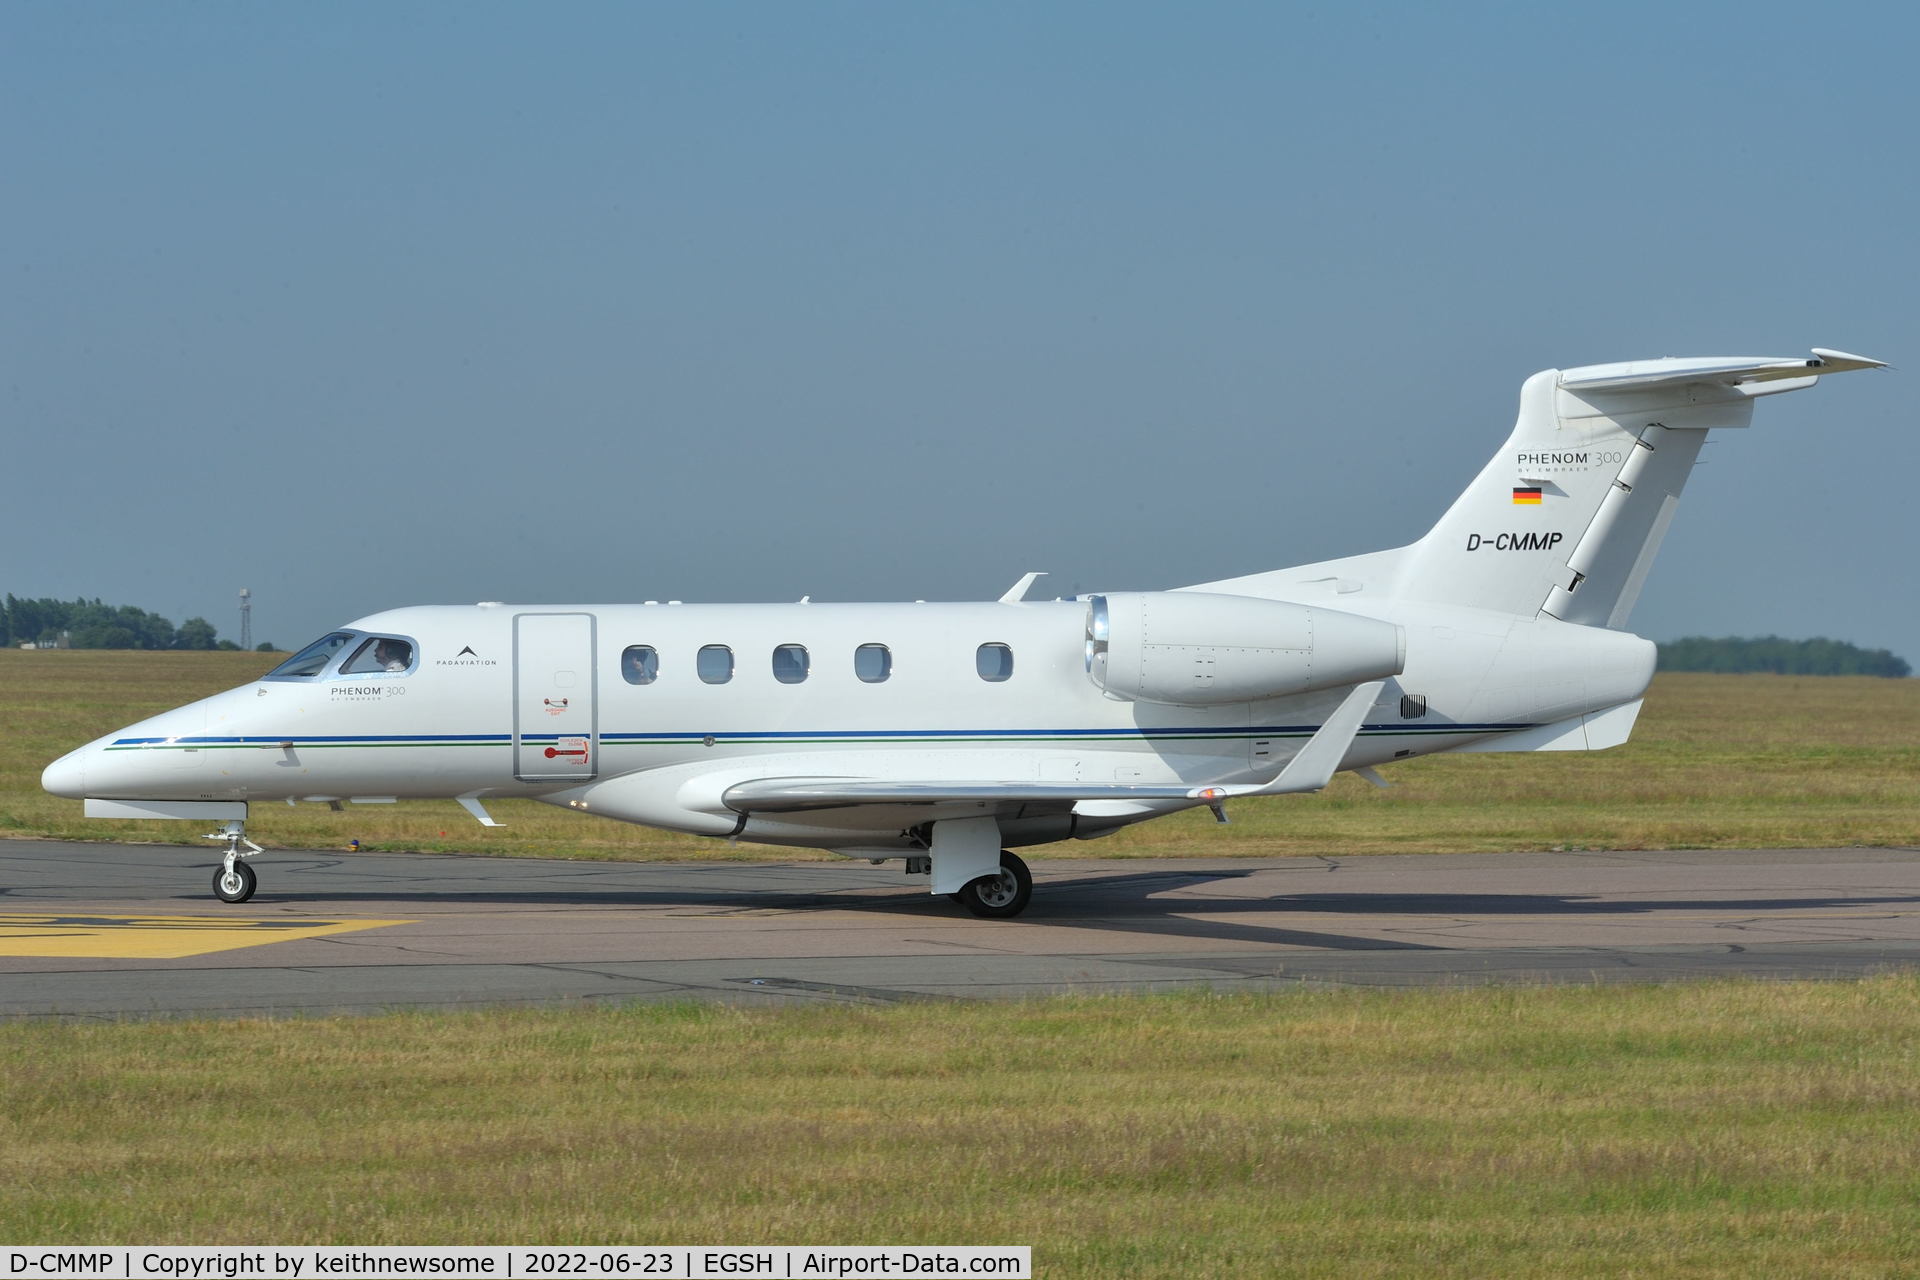 D-CMMP, 2016 Embraer EMB-505 Phenom 300 C/N 50500360, Arriving at Norwich from Nice.